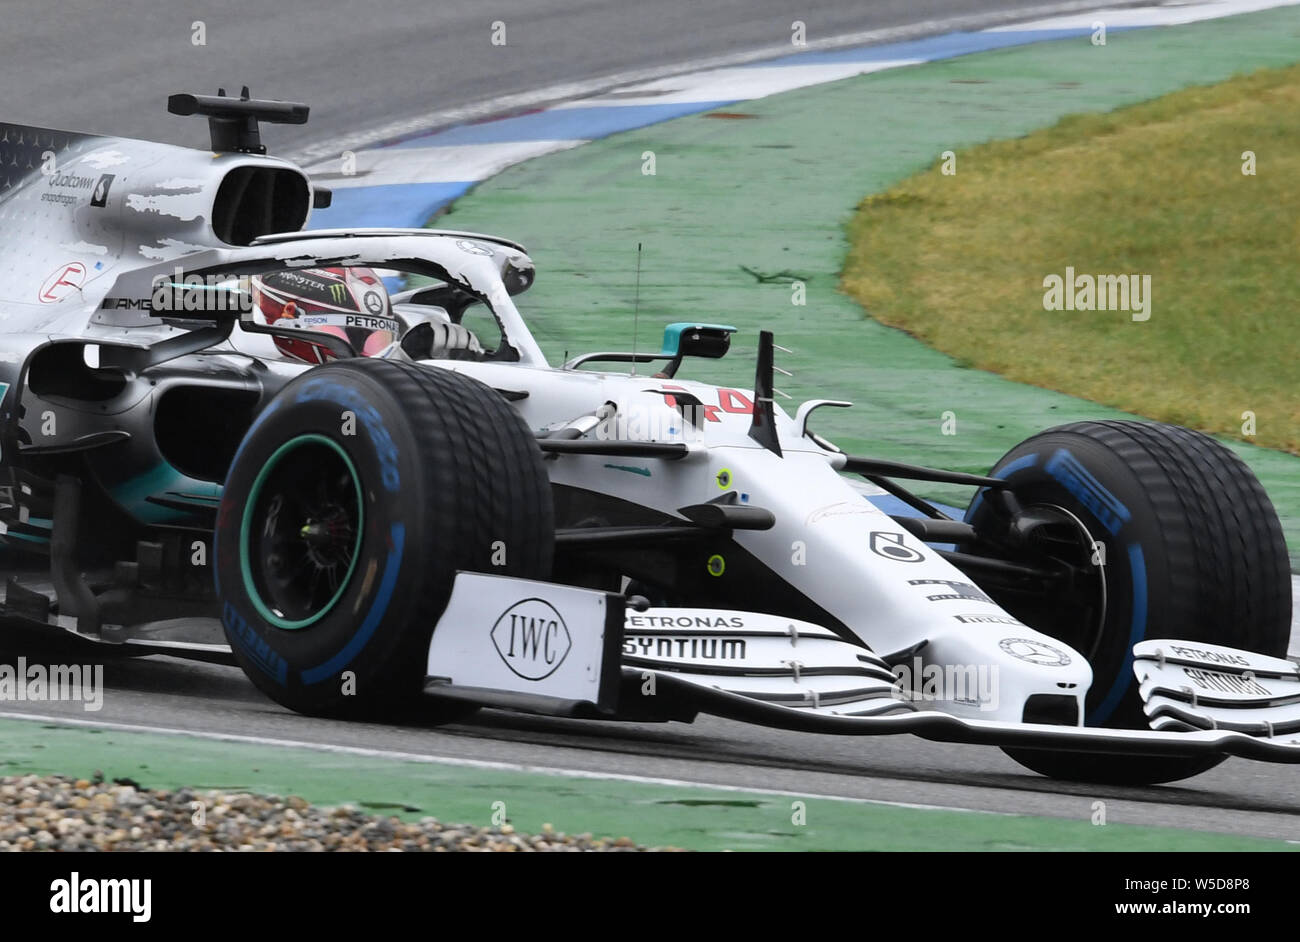 Hockenheim, Germany. 28th July, 2019. Motorsport: Formula 1 World Championship, Grand Prix of Germany. Lewis Hamilton from Great Britain of the Mercedes-AMG Petronas team drives across the track. (RECROP) Credit: Uli Deck/dpa/Alamy Live News Stock Photo